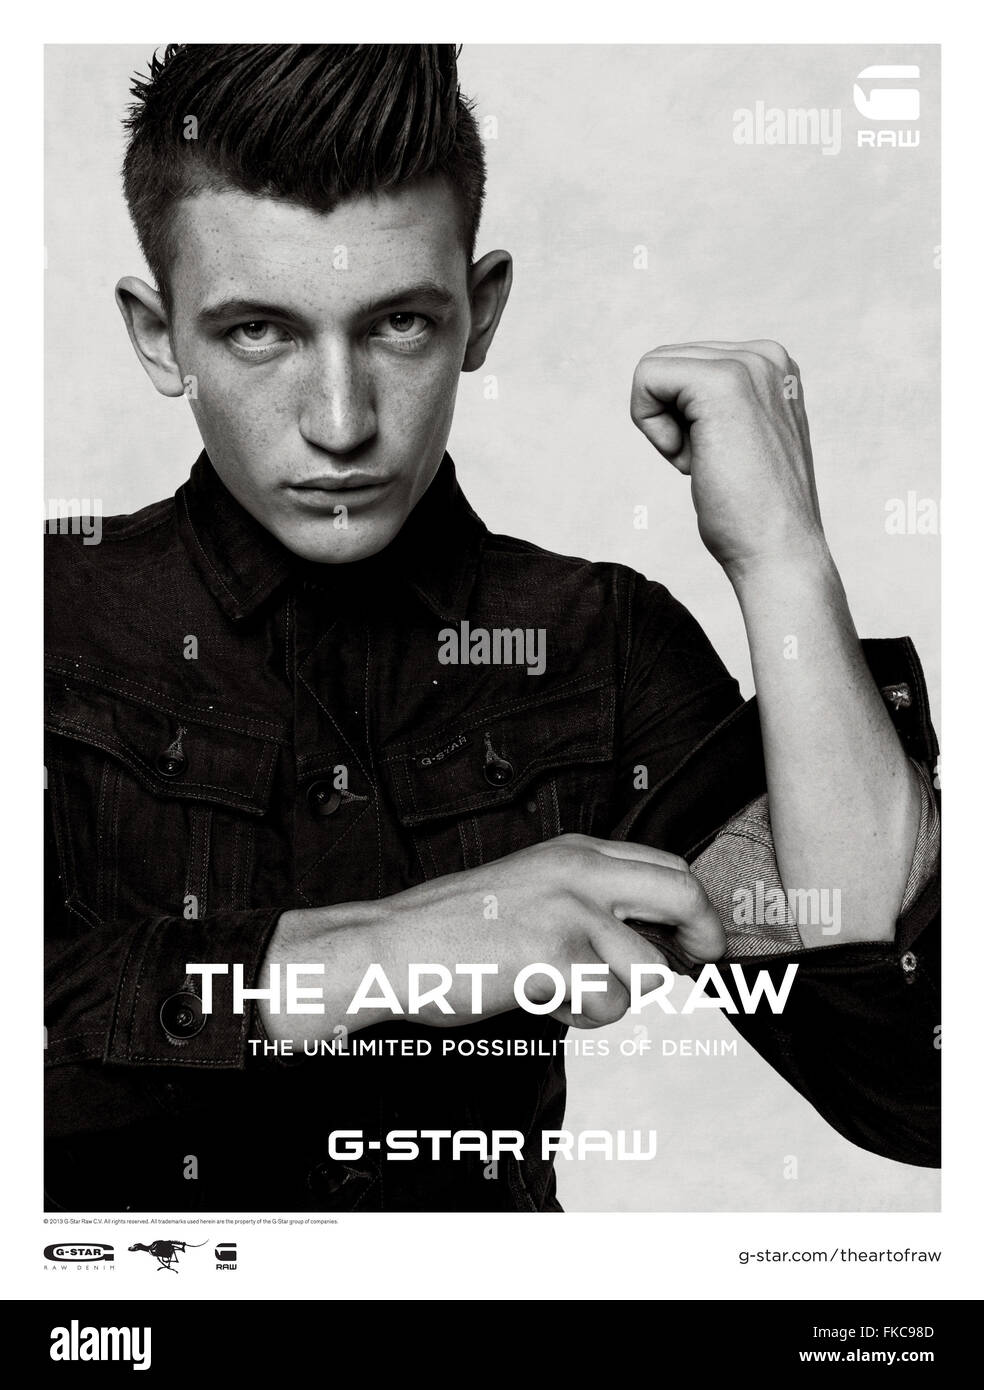 Page 3 - G Star Raw High Resolution Stock Photography and Images - Alamy